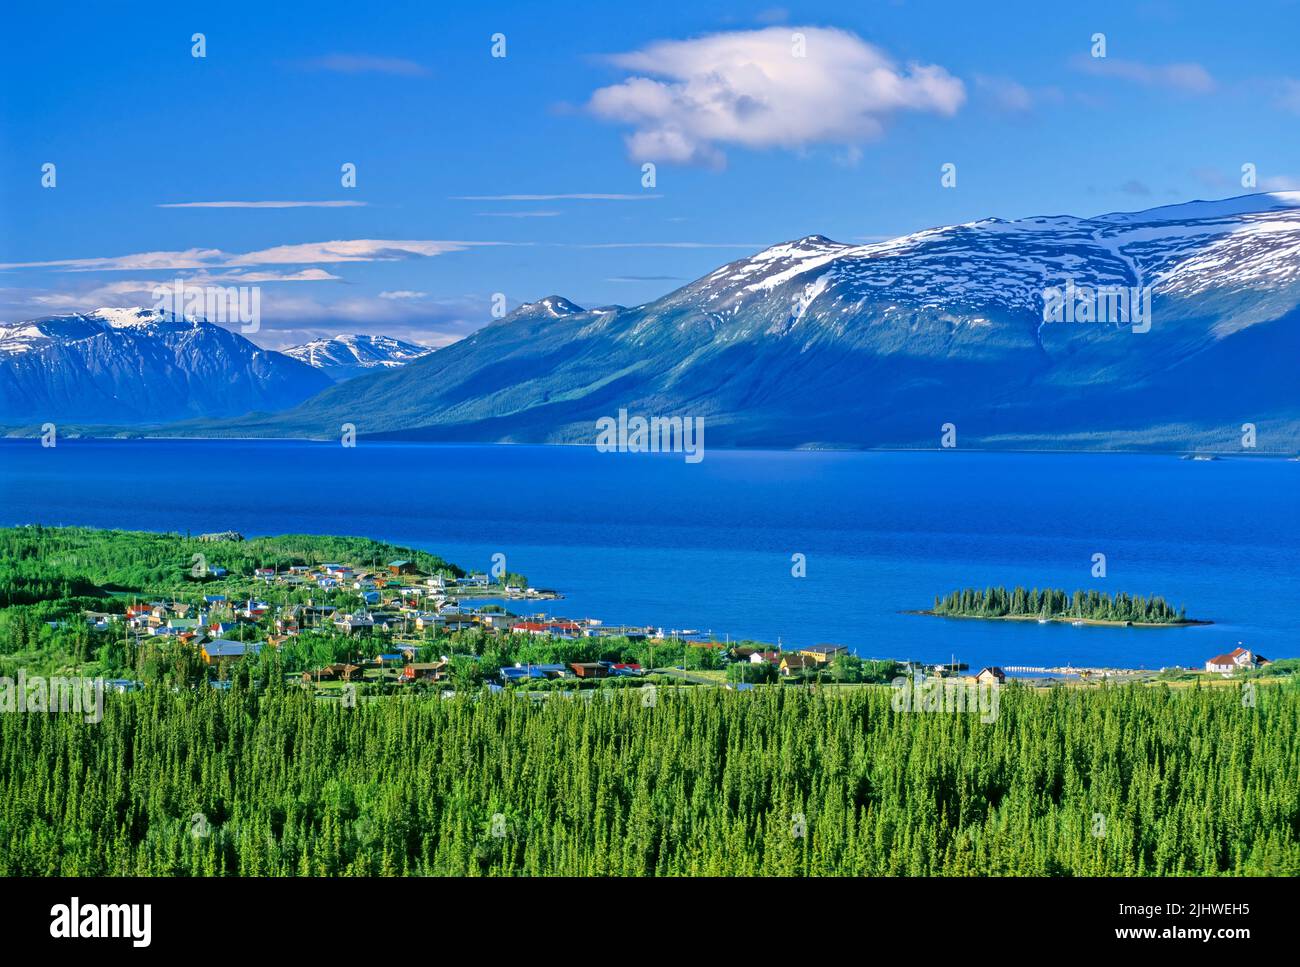 An areaial view of the small town of Atlin situated on the shores of Atlin Lake in northern British Columbia Canada. Stock Photo